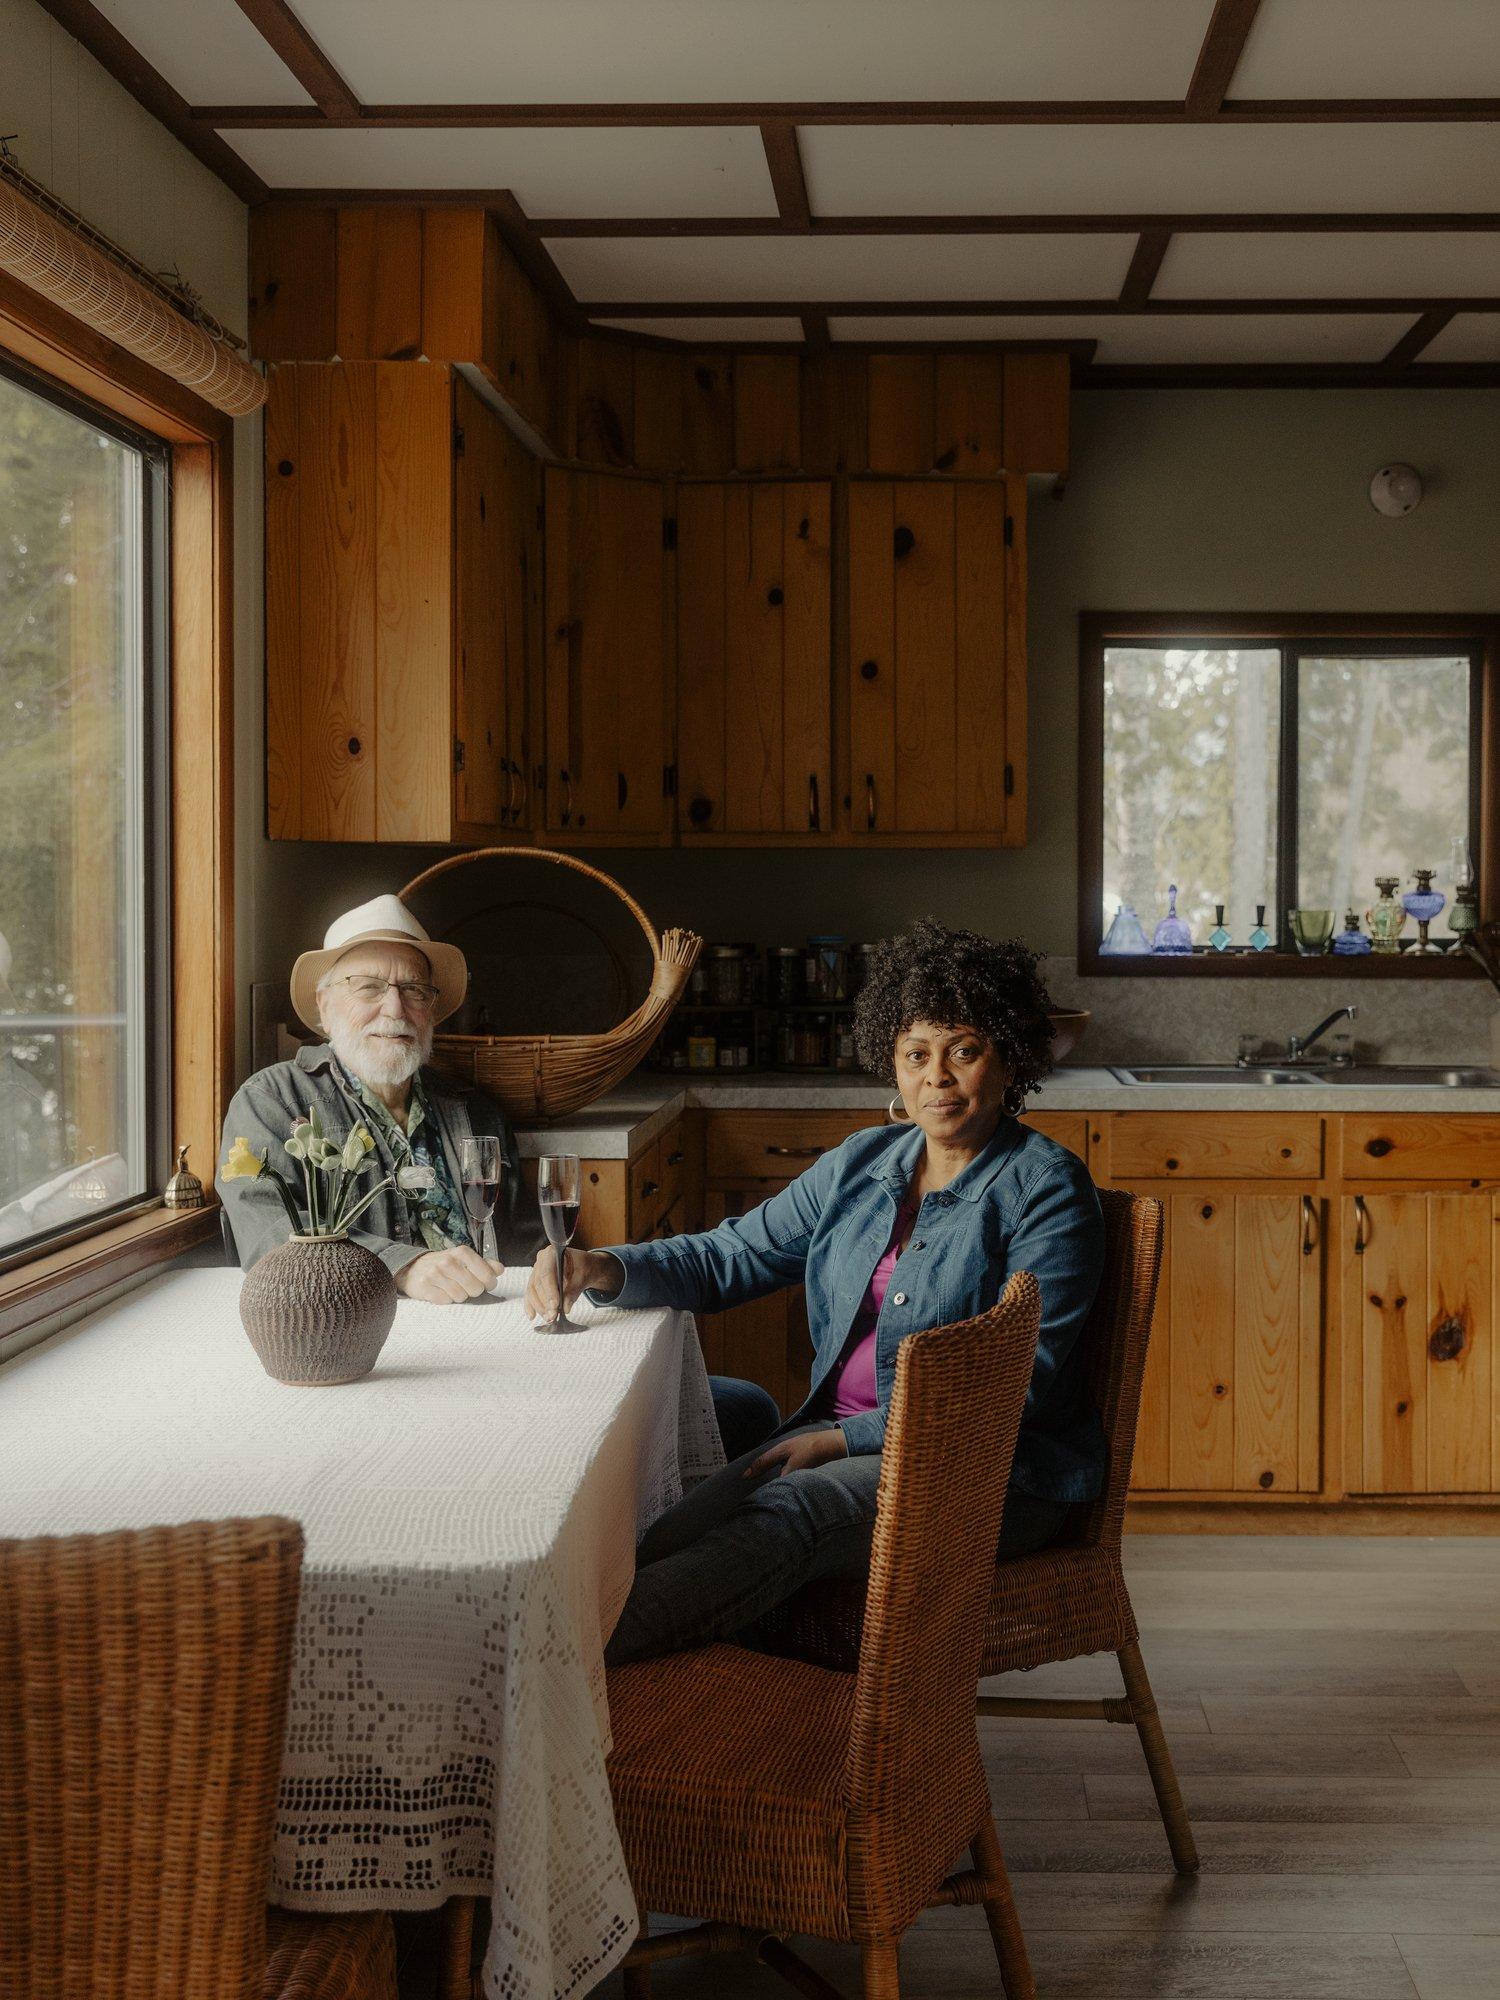 Shields and Askew are proud of their quintessential Canadian cabin.  